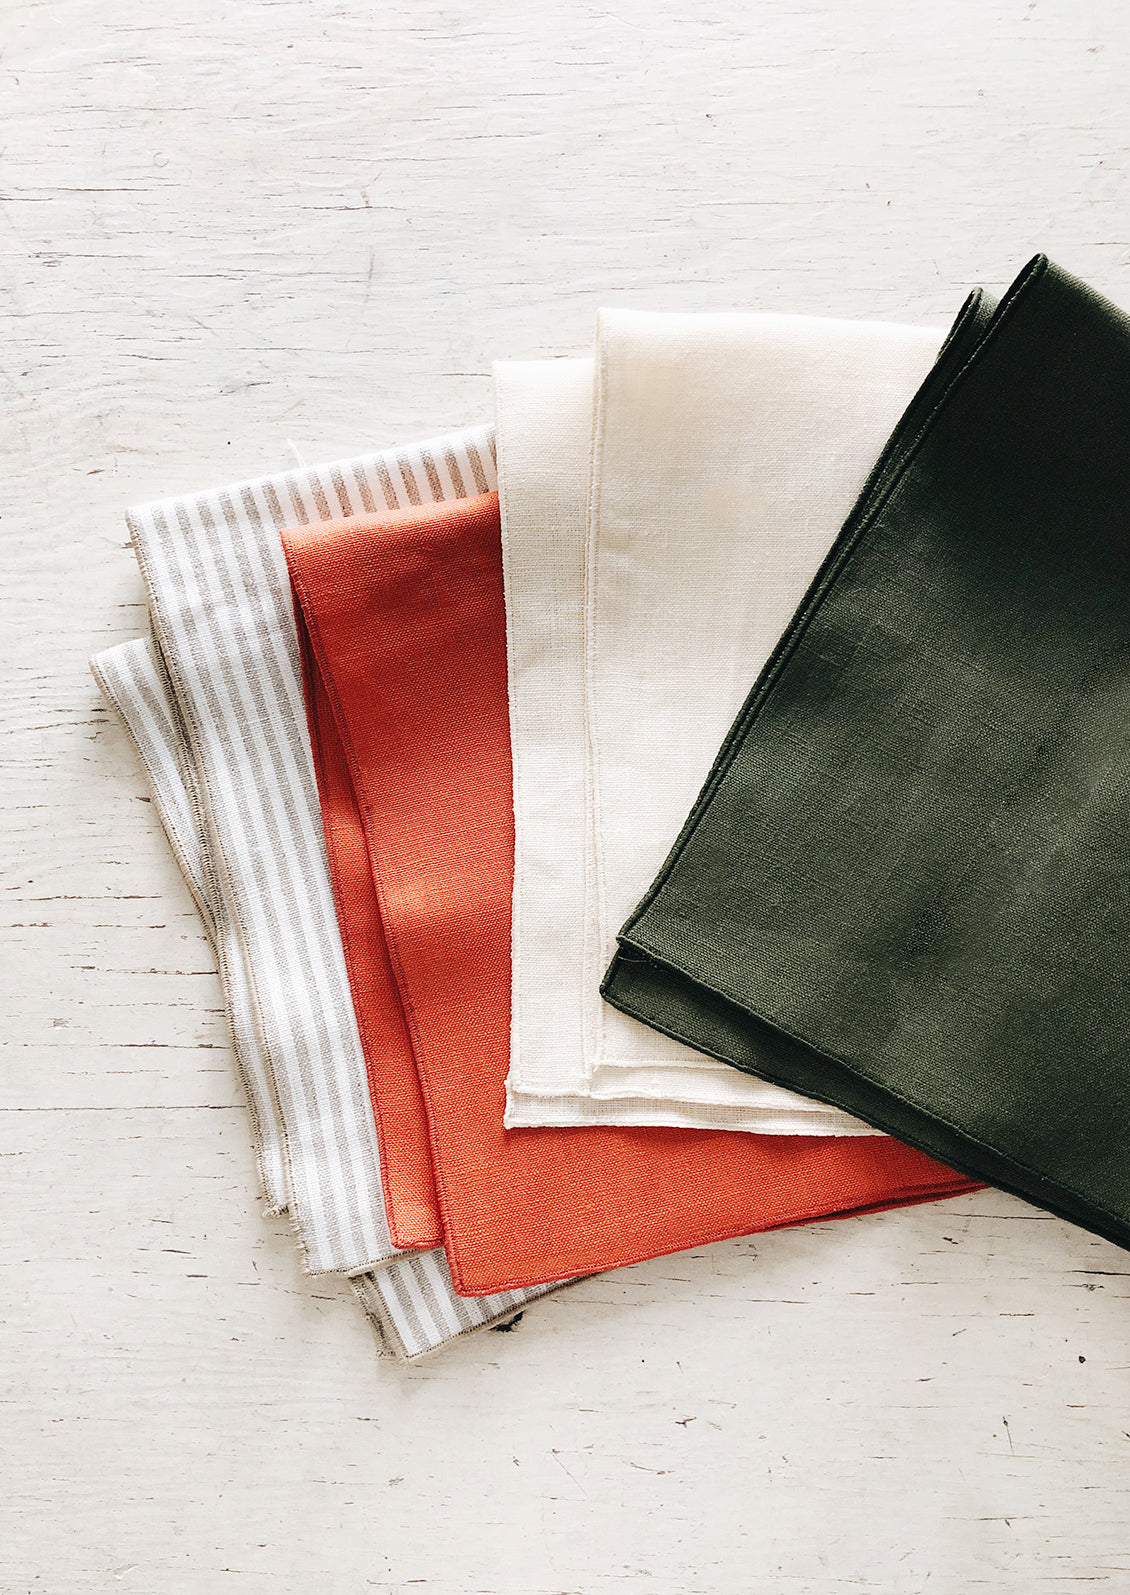 Linen Napkins splayed out in an array of colors.